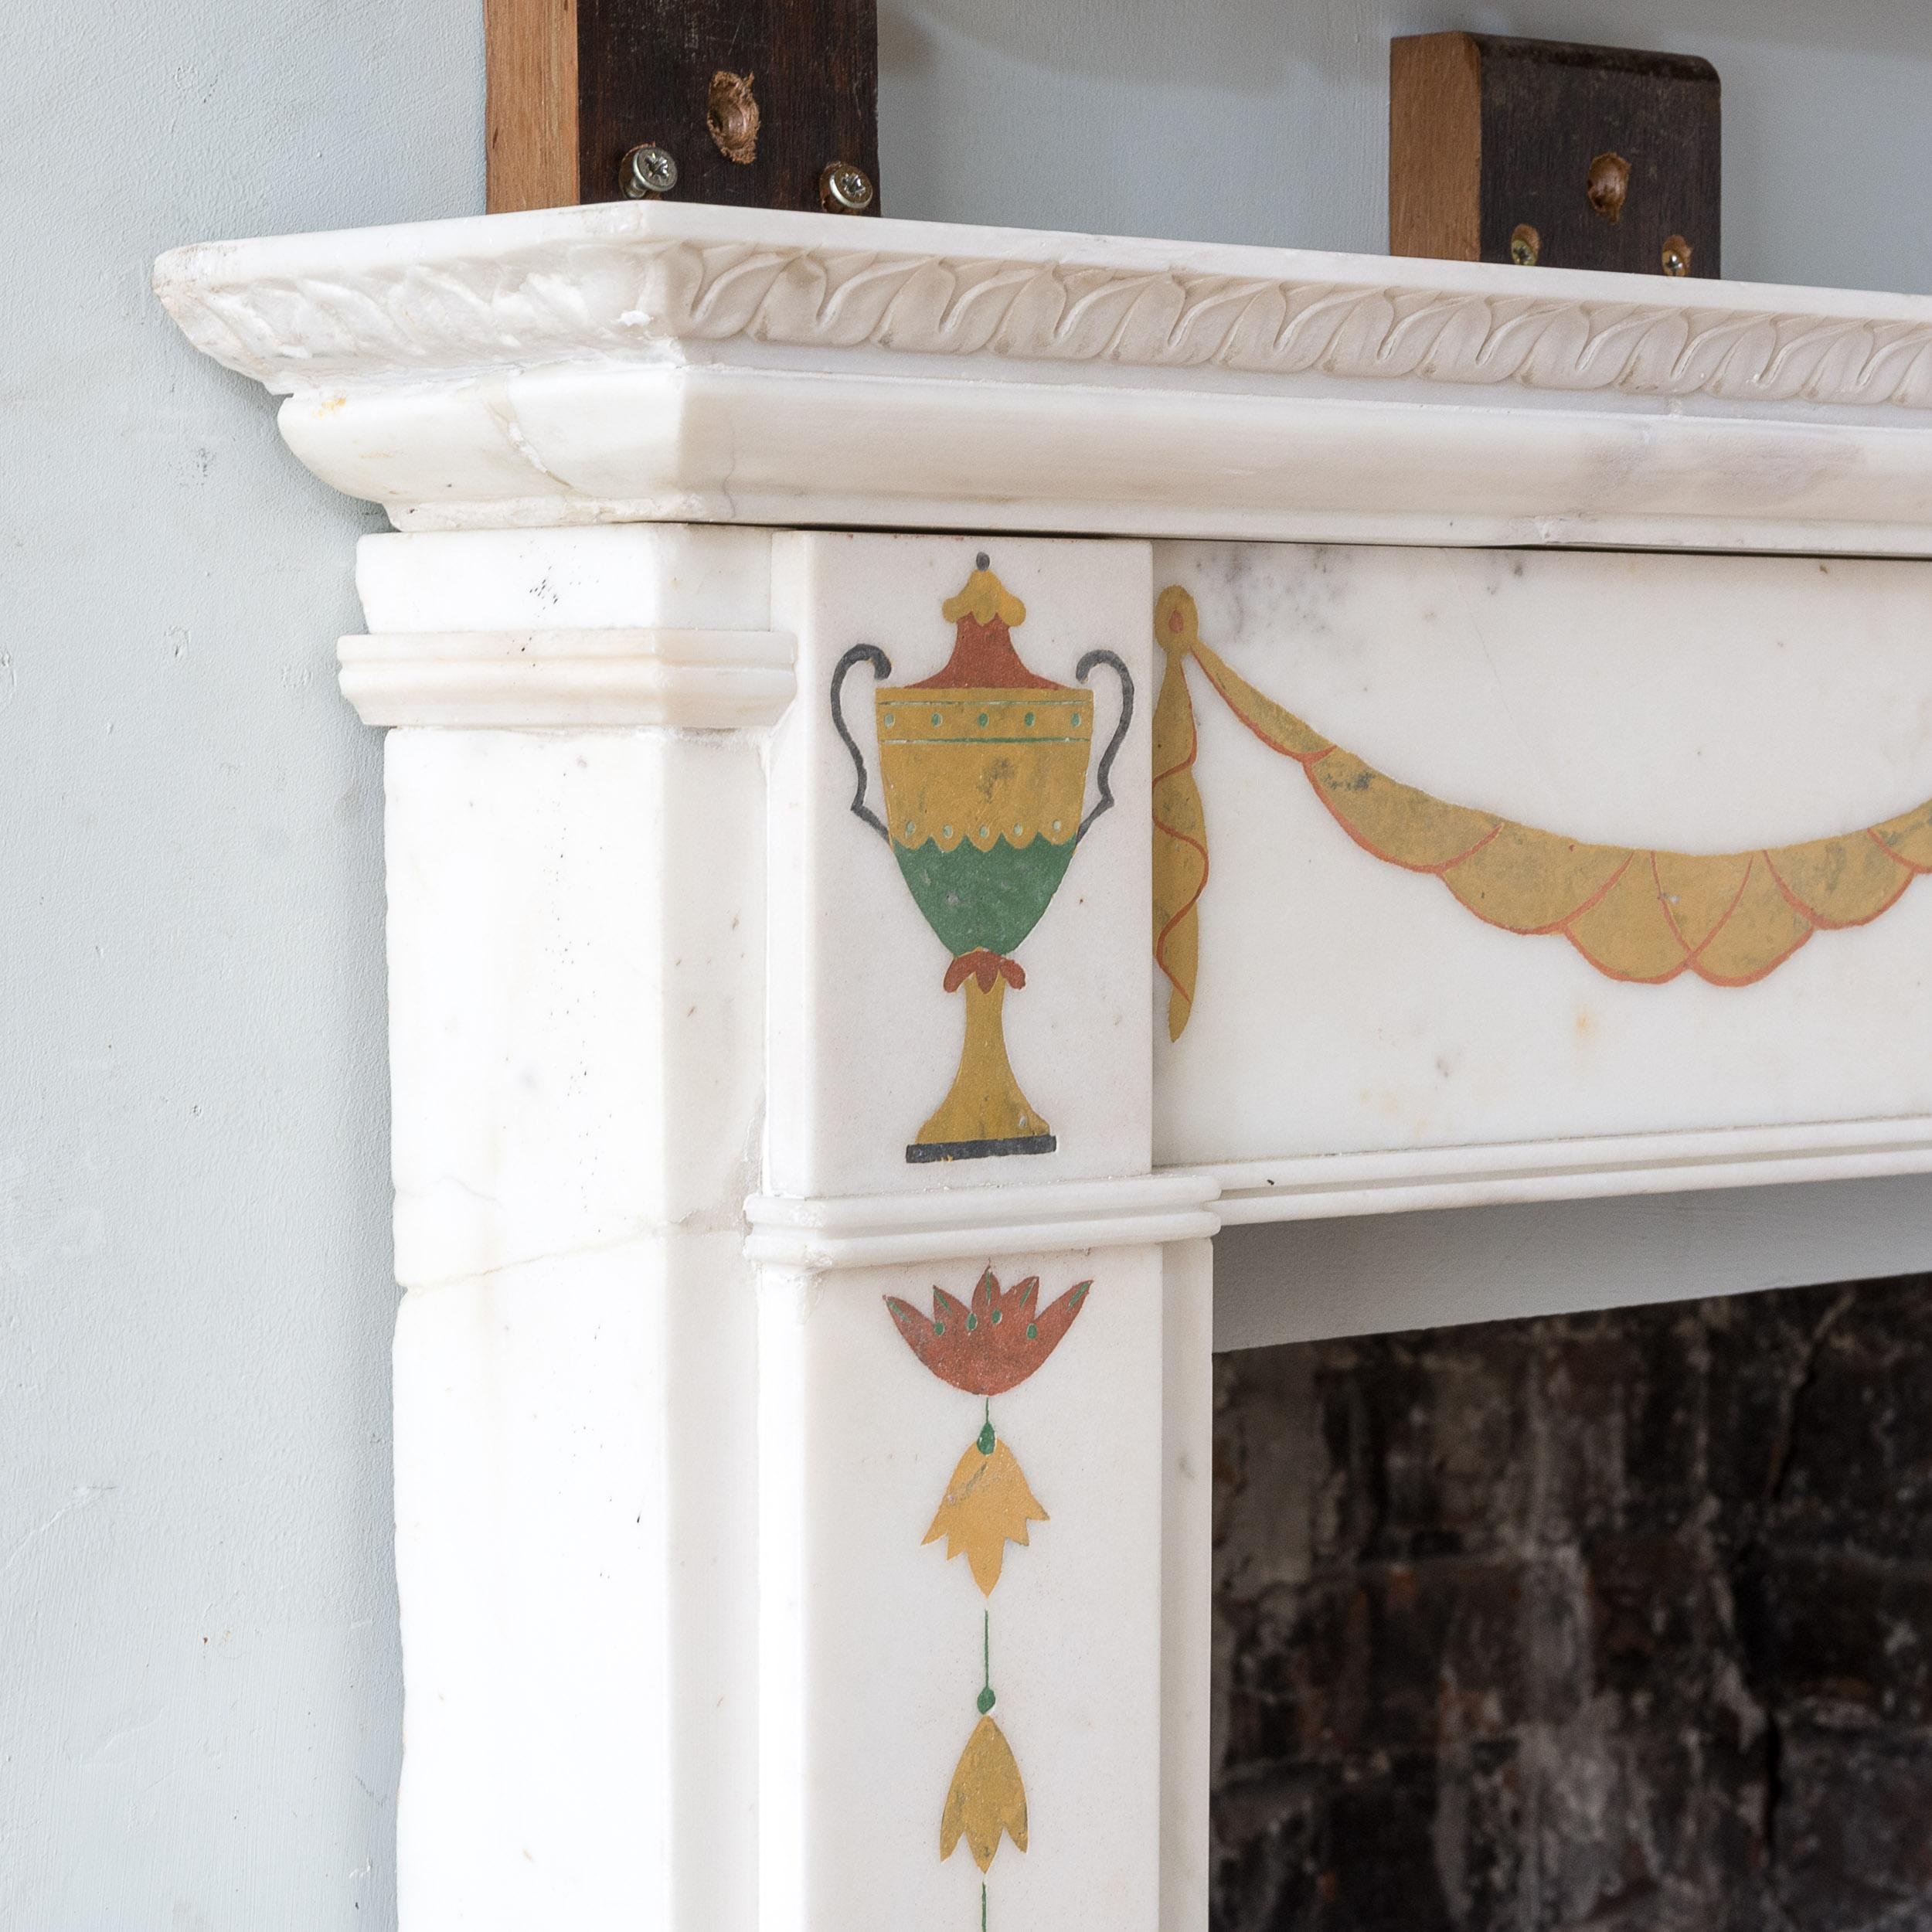 Regency Elegant Early Twentieth Century Statuary Marble Neo-Classical Fire Surround For Sale